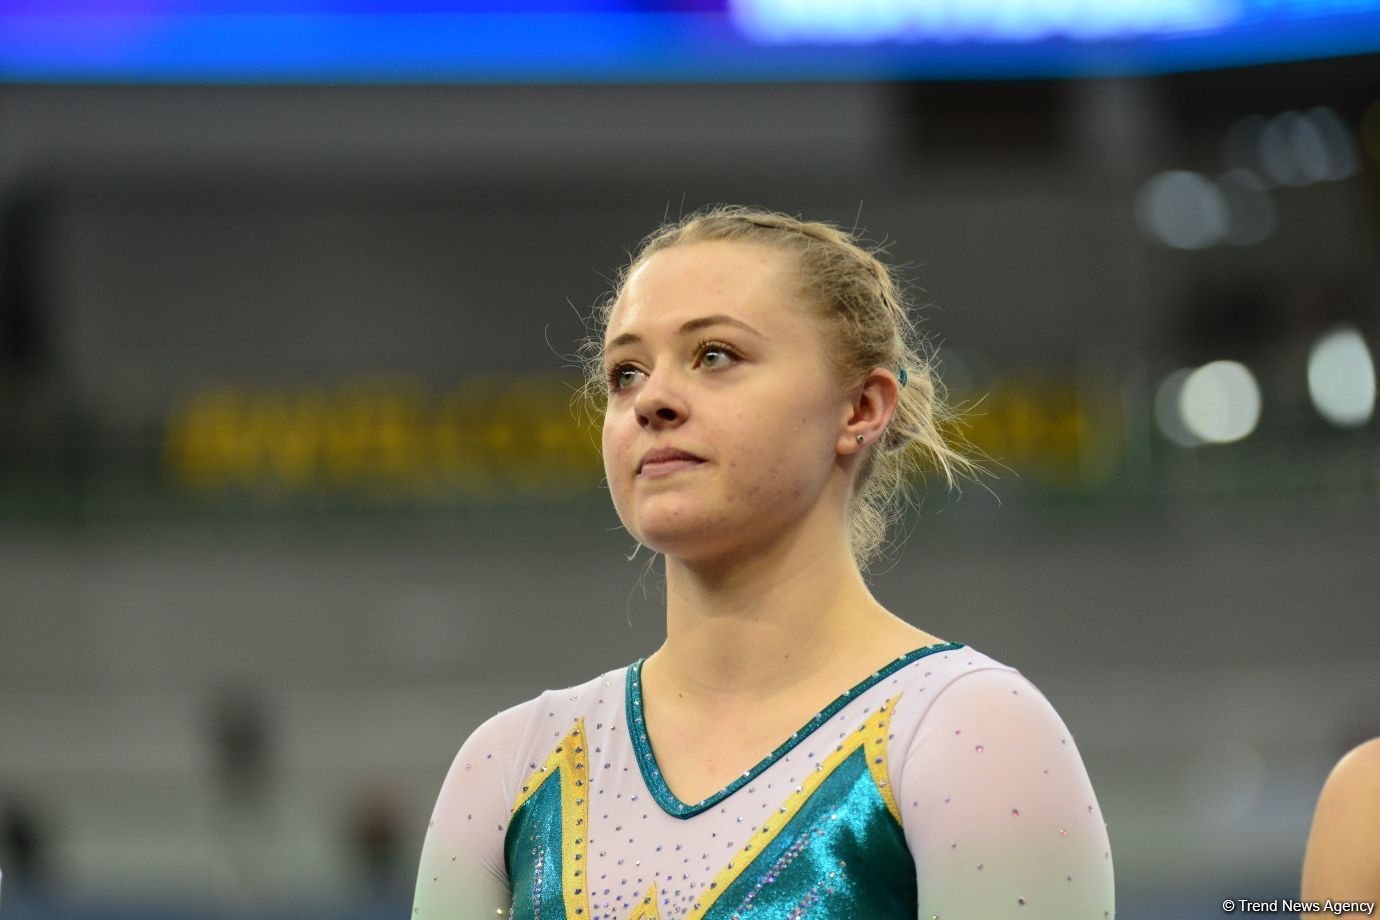 Finals of FIG World Cup in Trampoline, Tumbling kicks off in Baku (PHOTO)